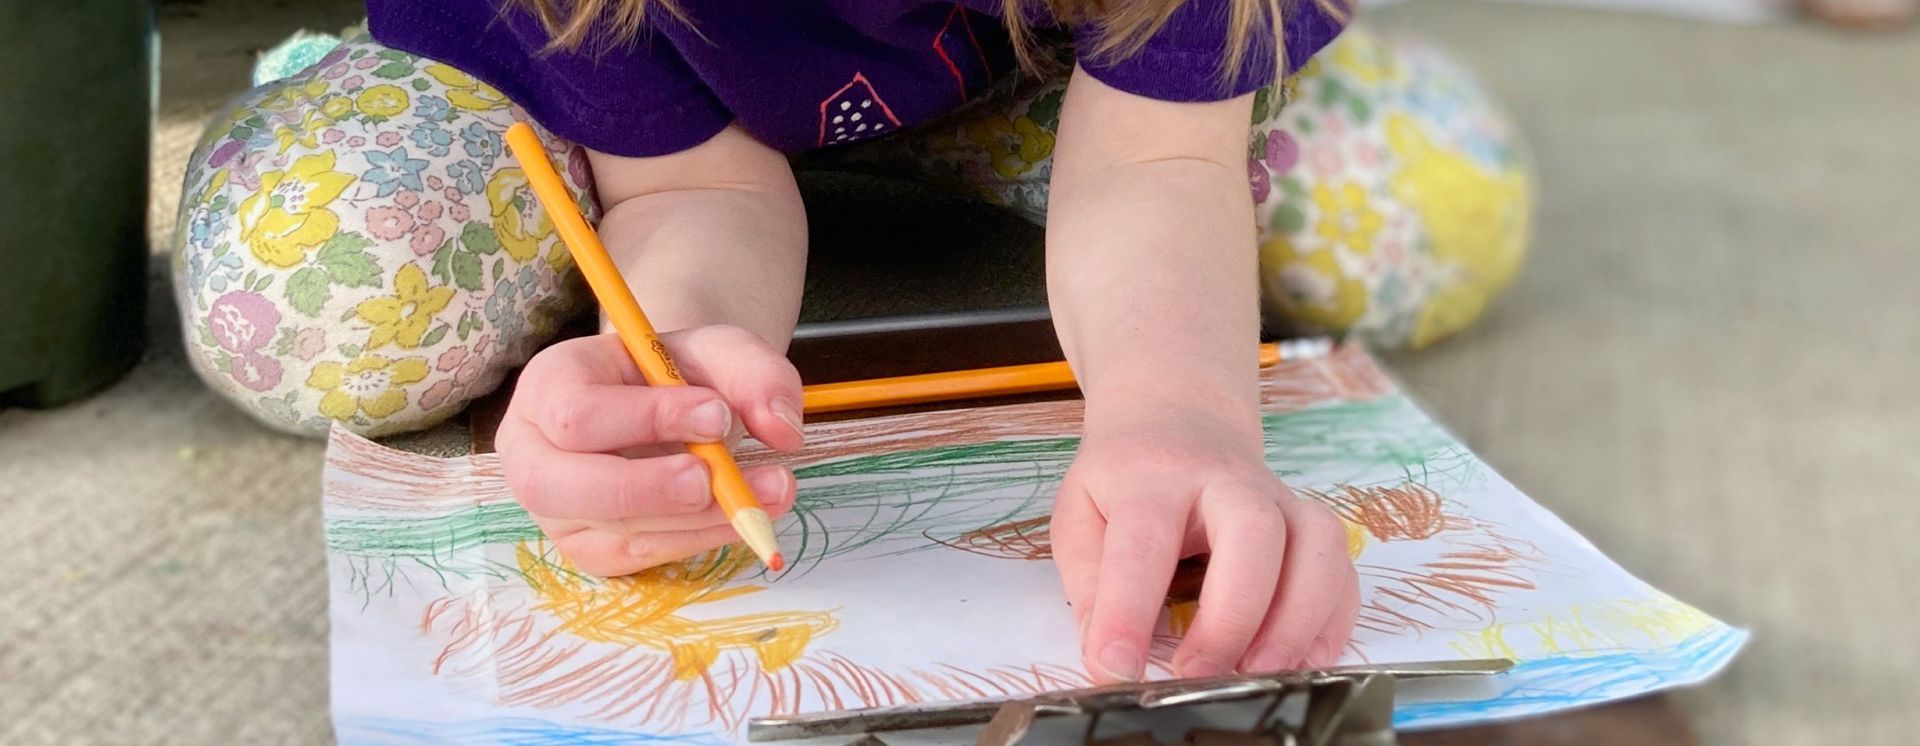 Close up of a child's hands drawing a picture with colored pencils